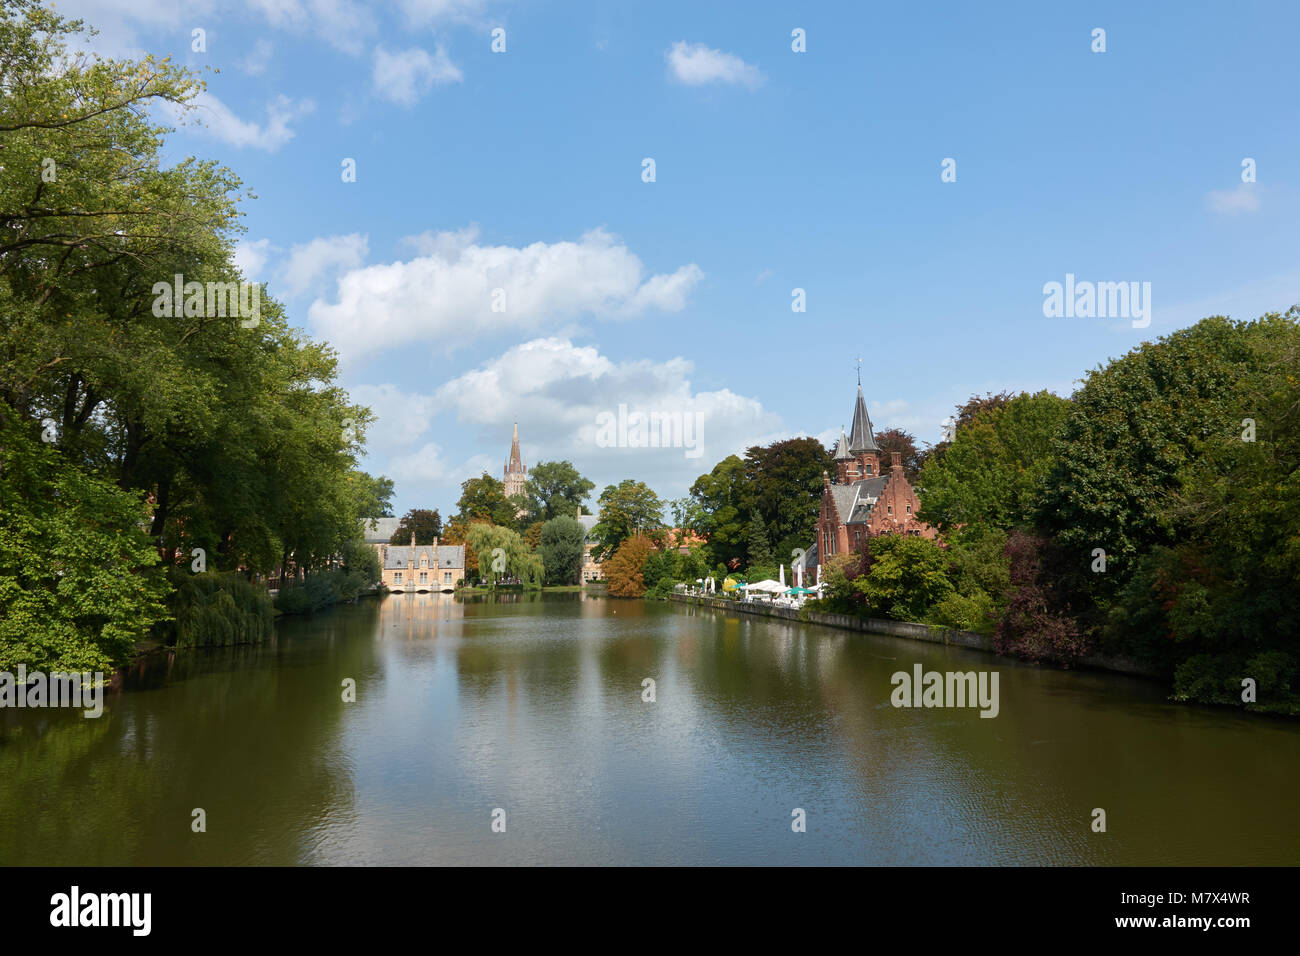 The most beautiful scenic place. Medieval houses on the shore of the lake. Green trees and a blue summer sky. Stock Photo